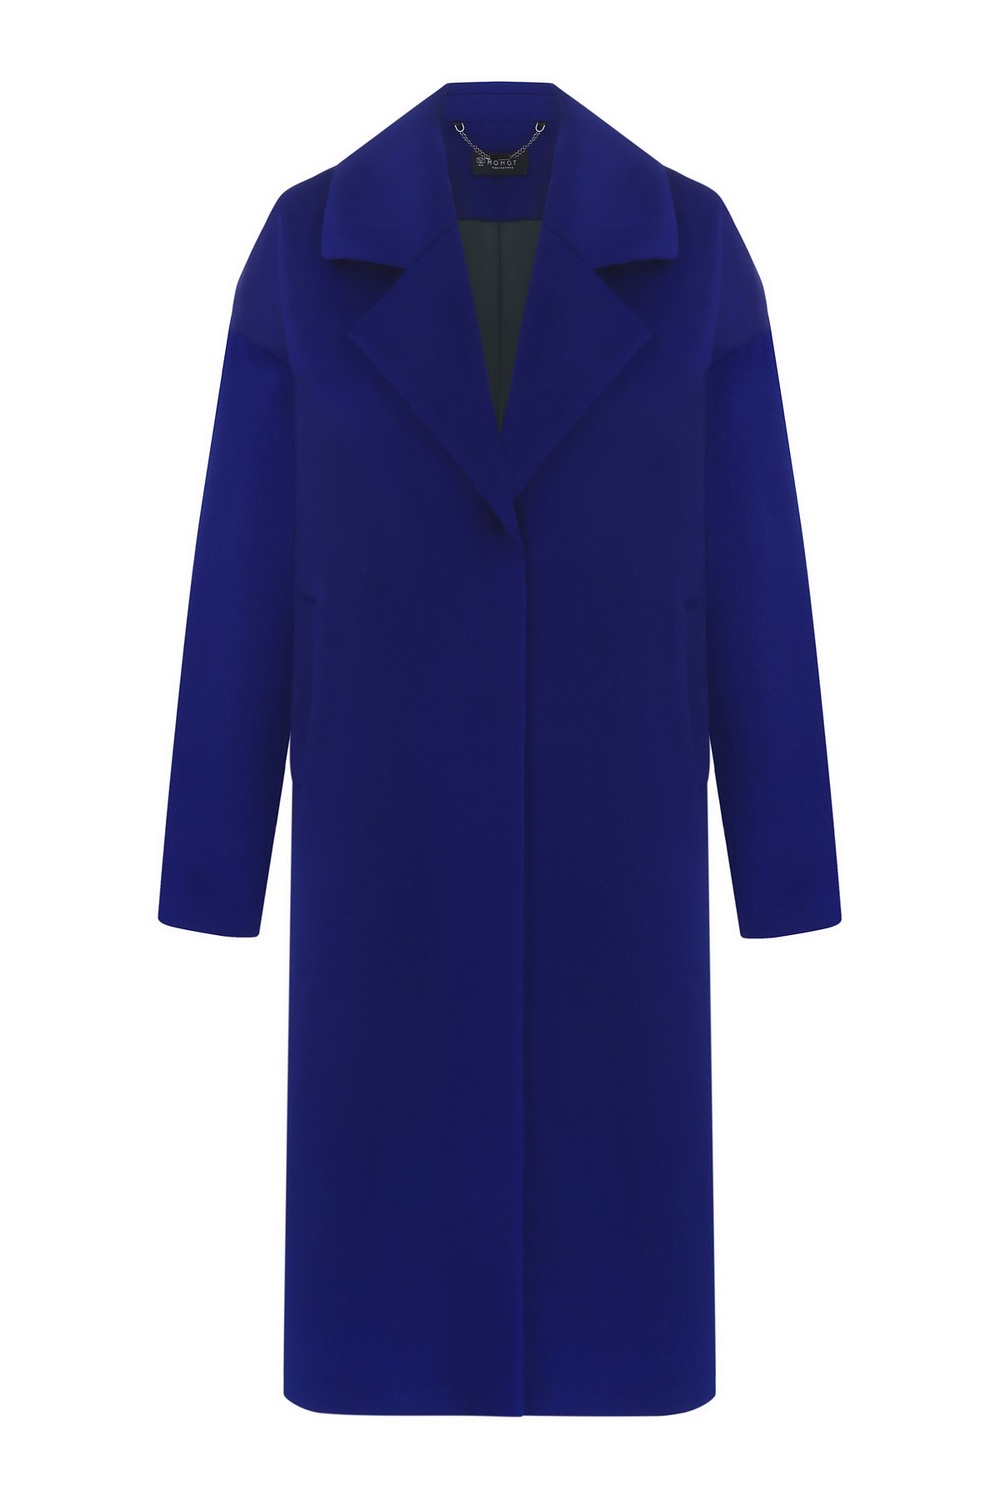 Velvety wool coat with a small pile electric color